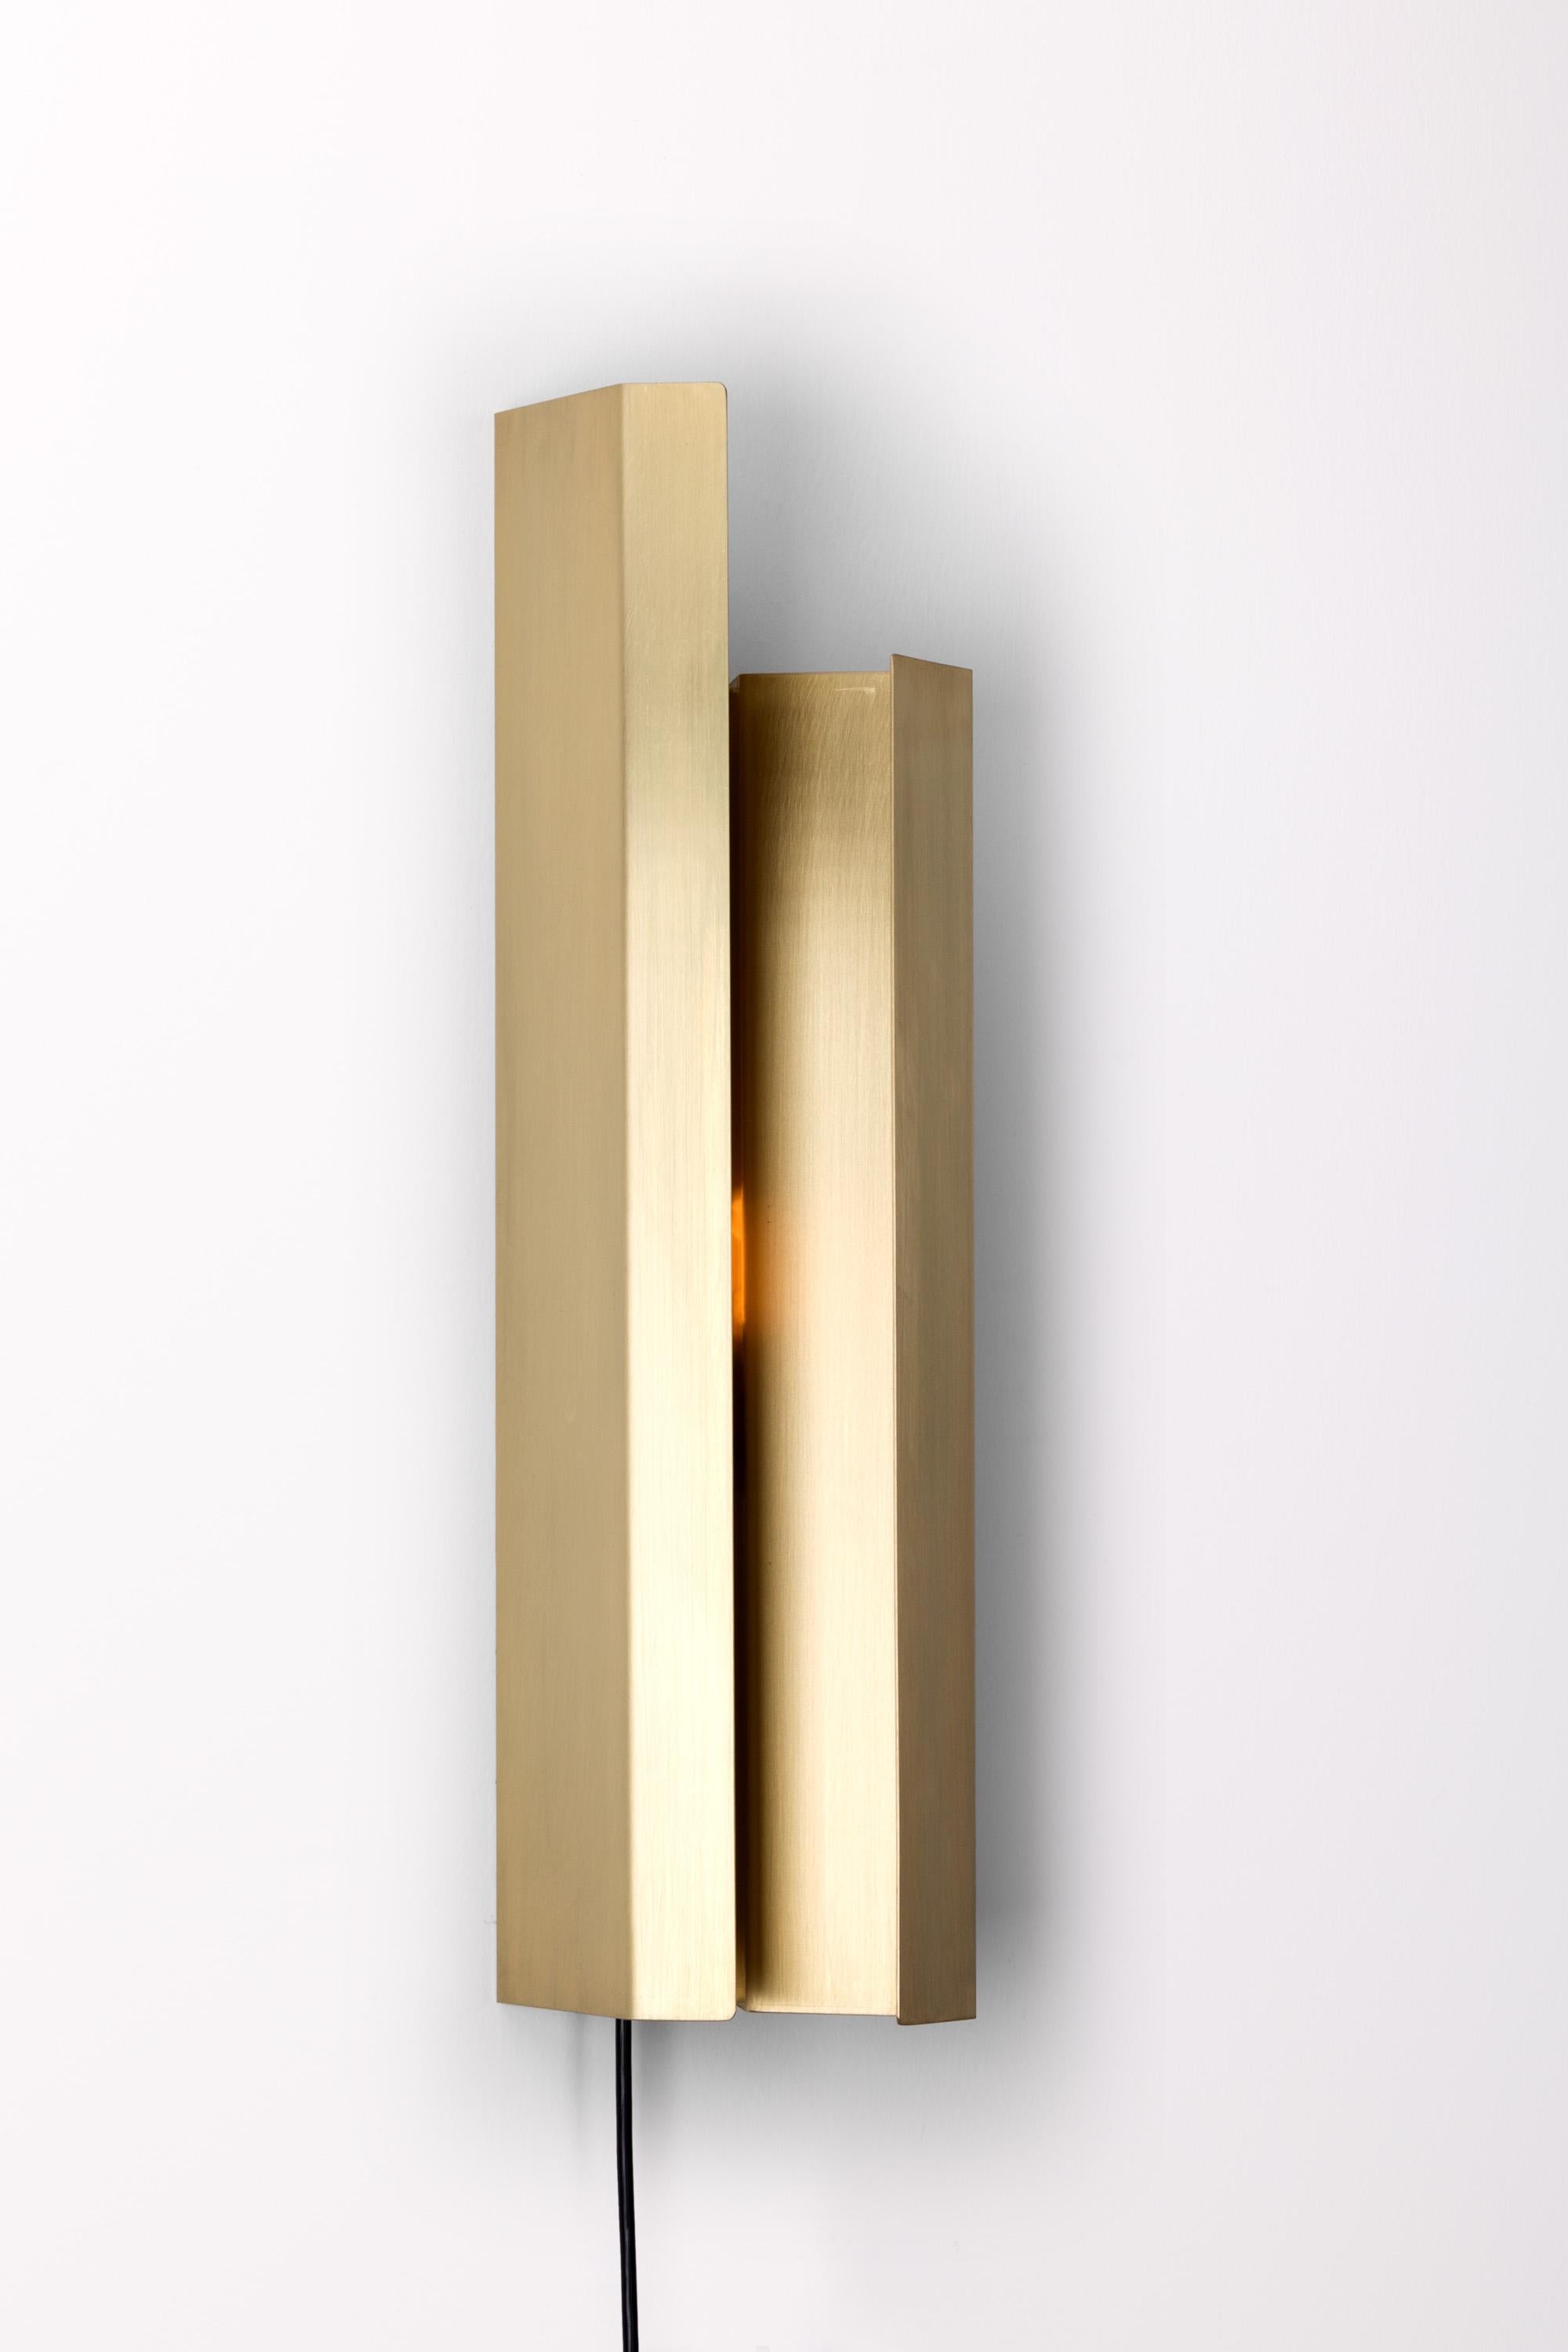 Piega wall sconce by Mingardo
Dimensions: D15 x W18x H59 cm 
Materials: Satin natural brass
Weight: 6 kg

Also Available in different finishes.

All our lamps can be wired according to each country. If sold to the USA it will be wired for the